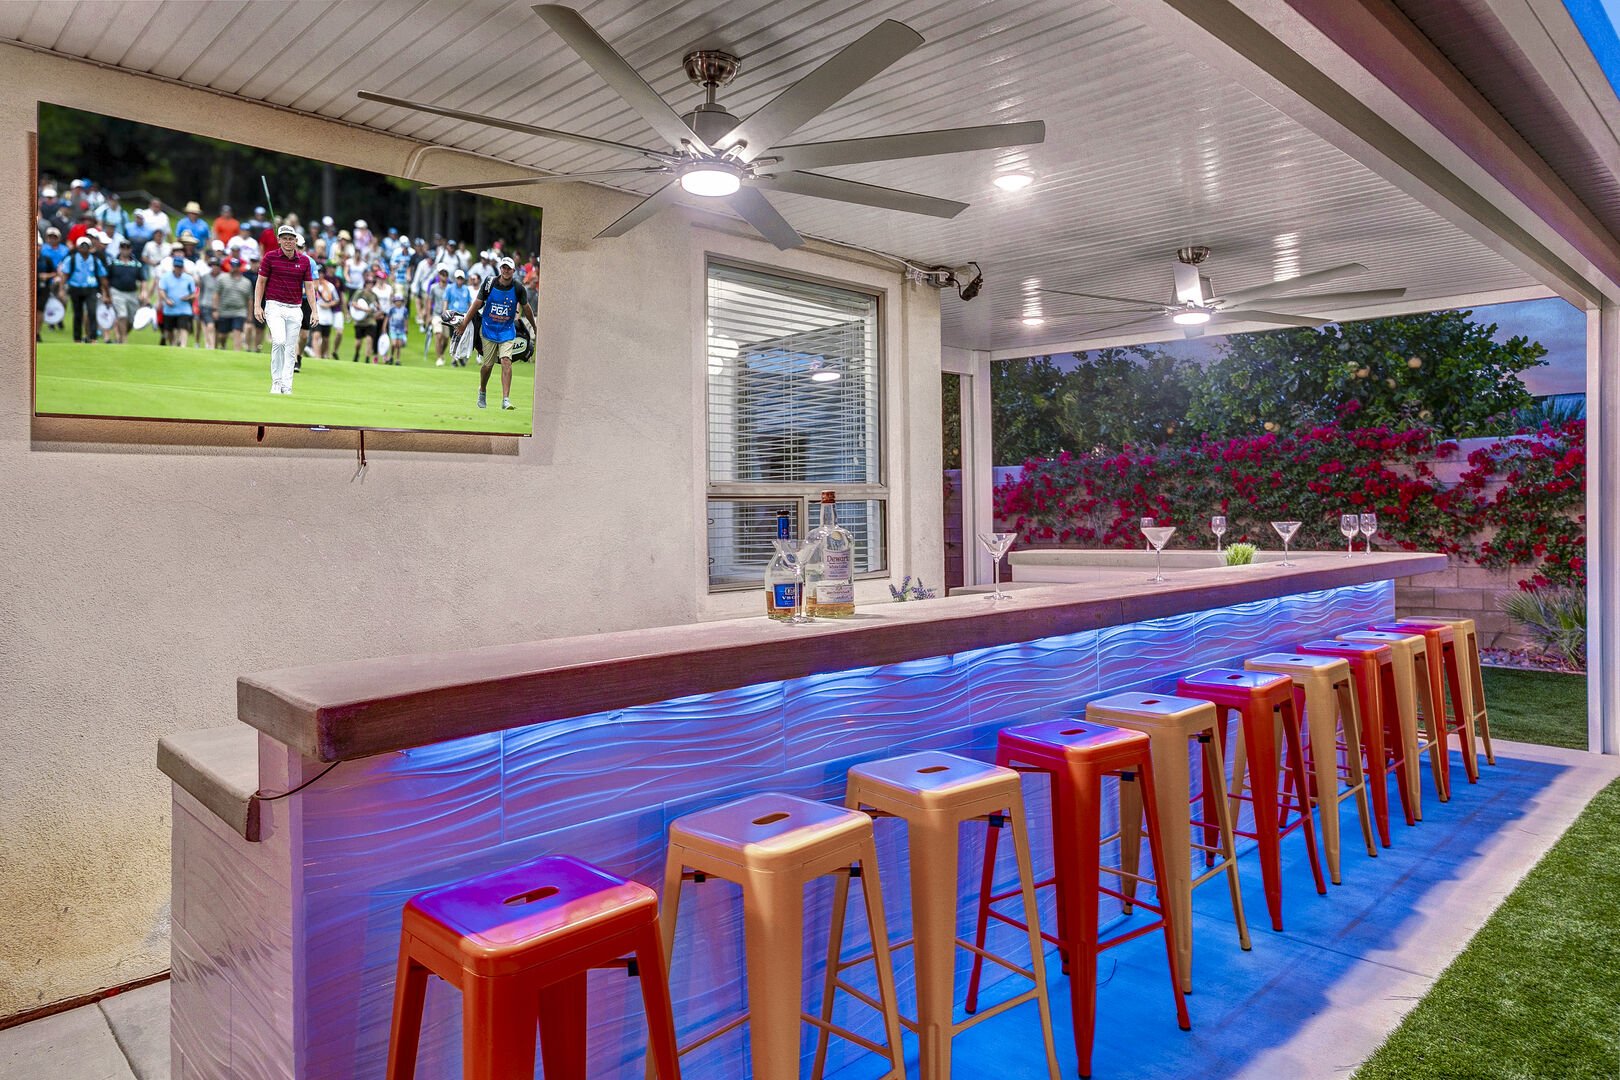 Keep the fun going and watch the latest game from the outdoor TV and stay cool under the lighted ceiling fan.